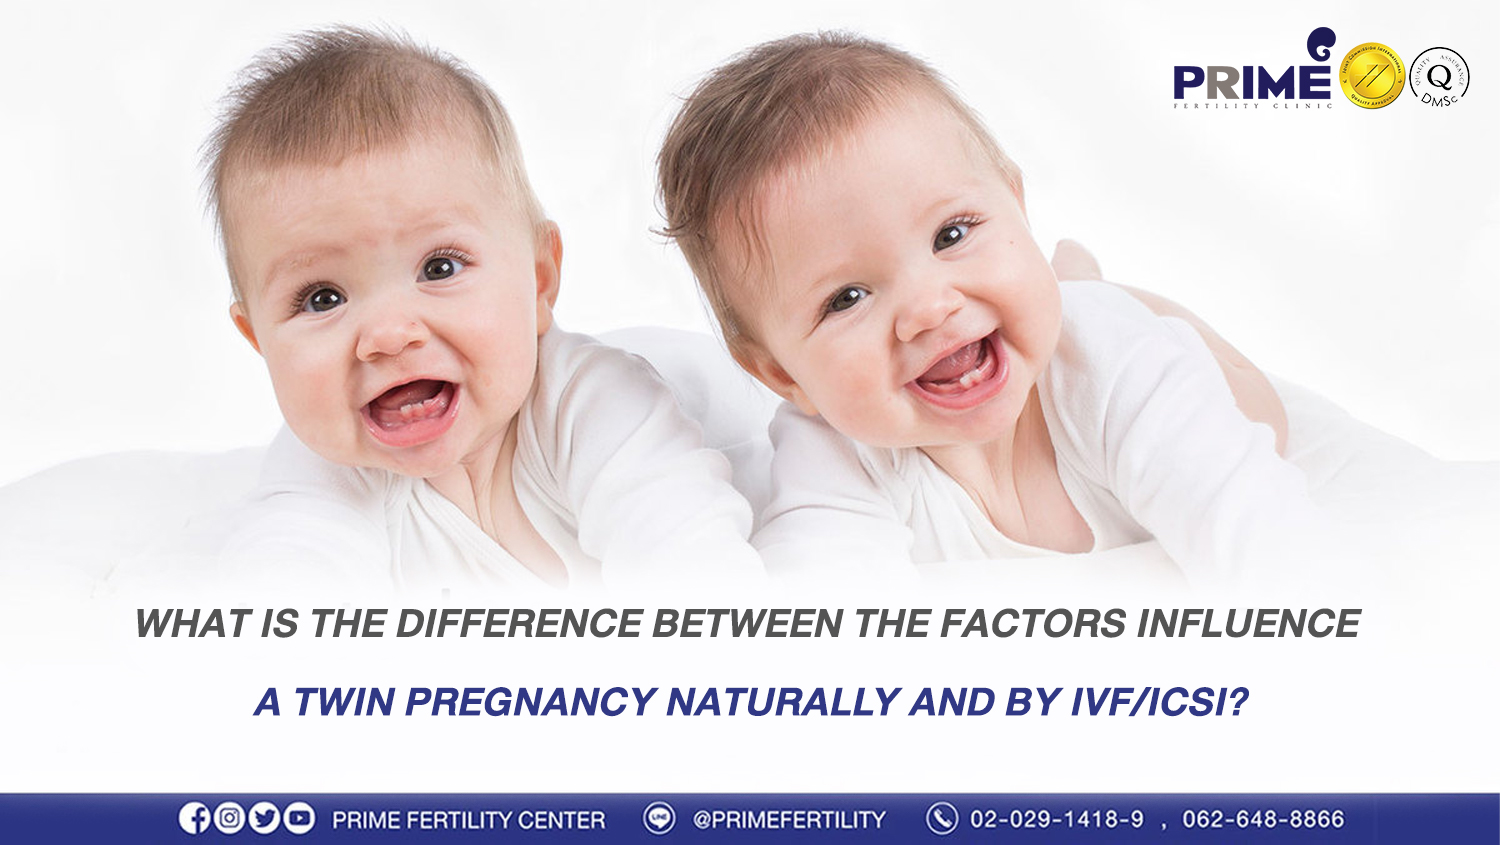 What is the difference between the factors influence a twin pregnancy naturally and by IVF/ICSI?